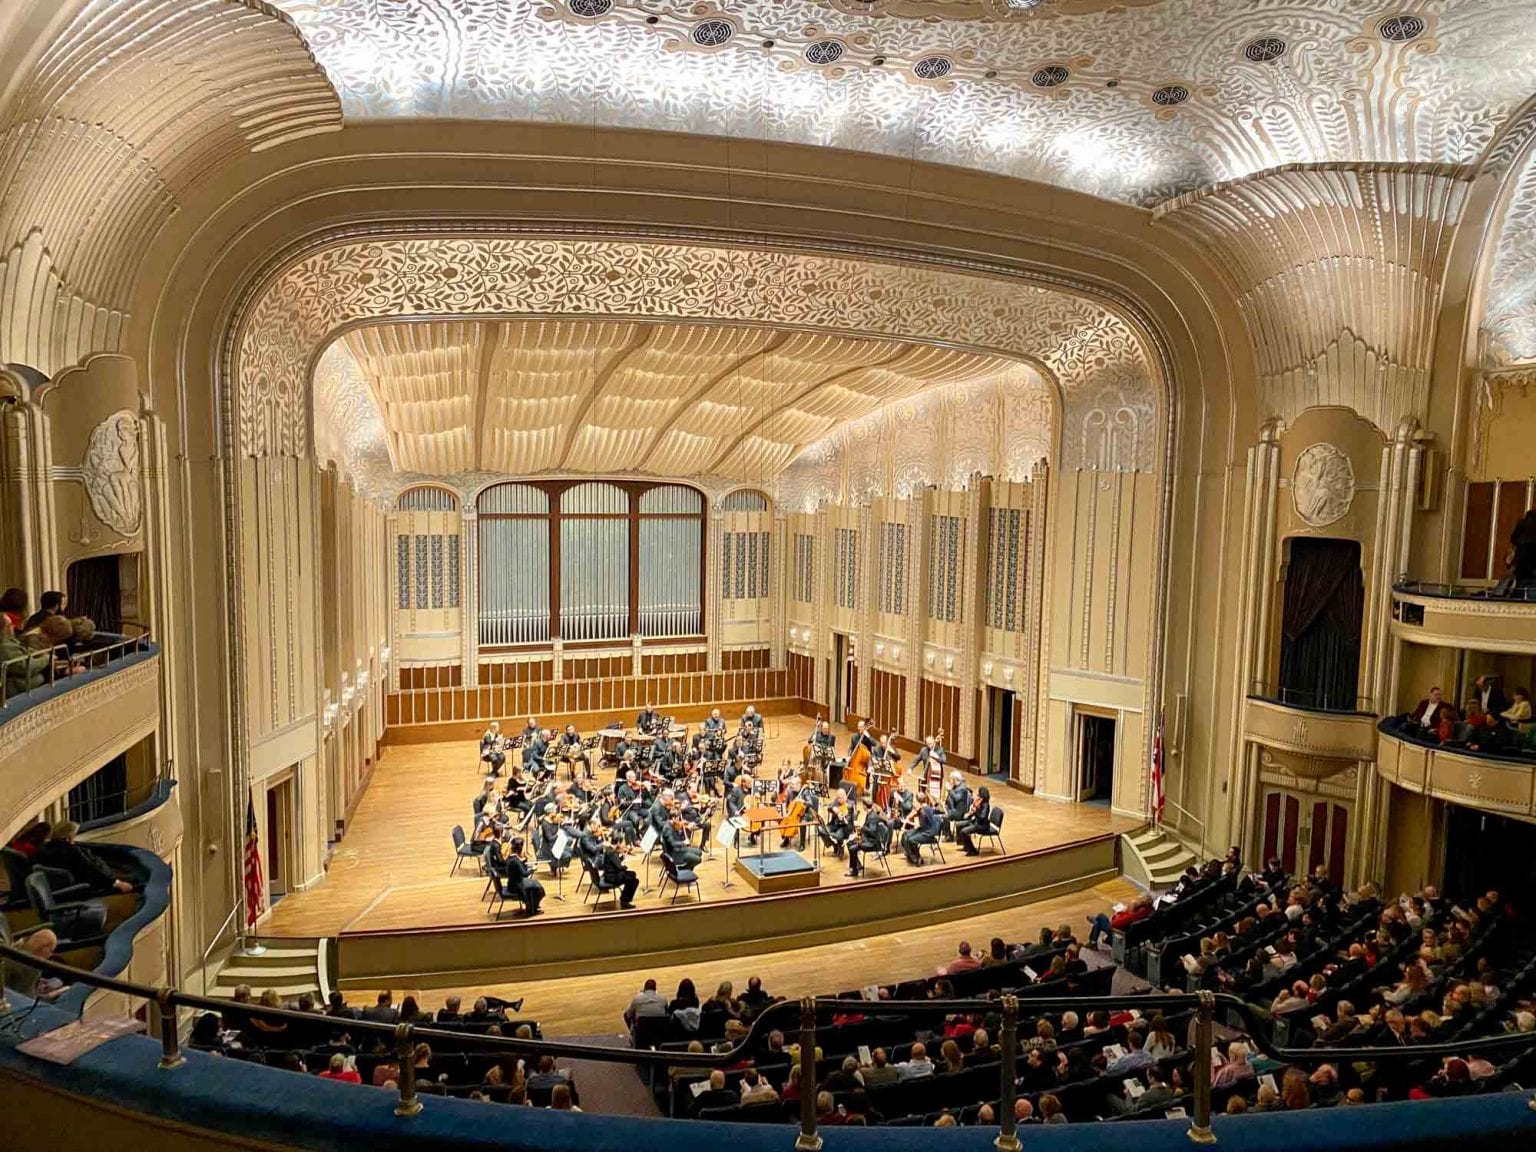 How to See the Cleveland Orchestra Perform + Tour Severance Hall